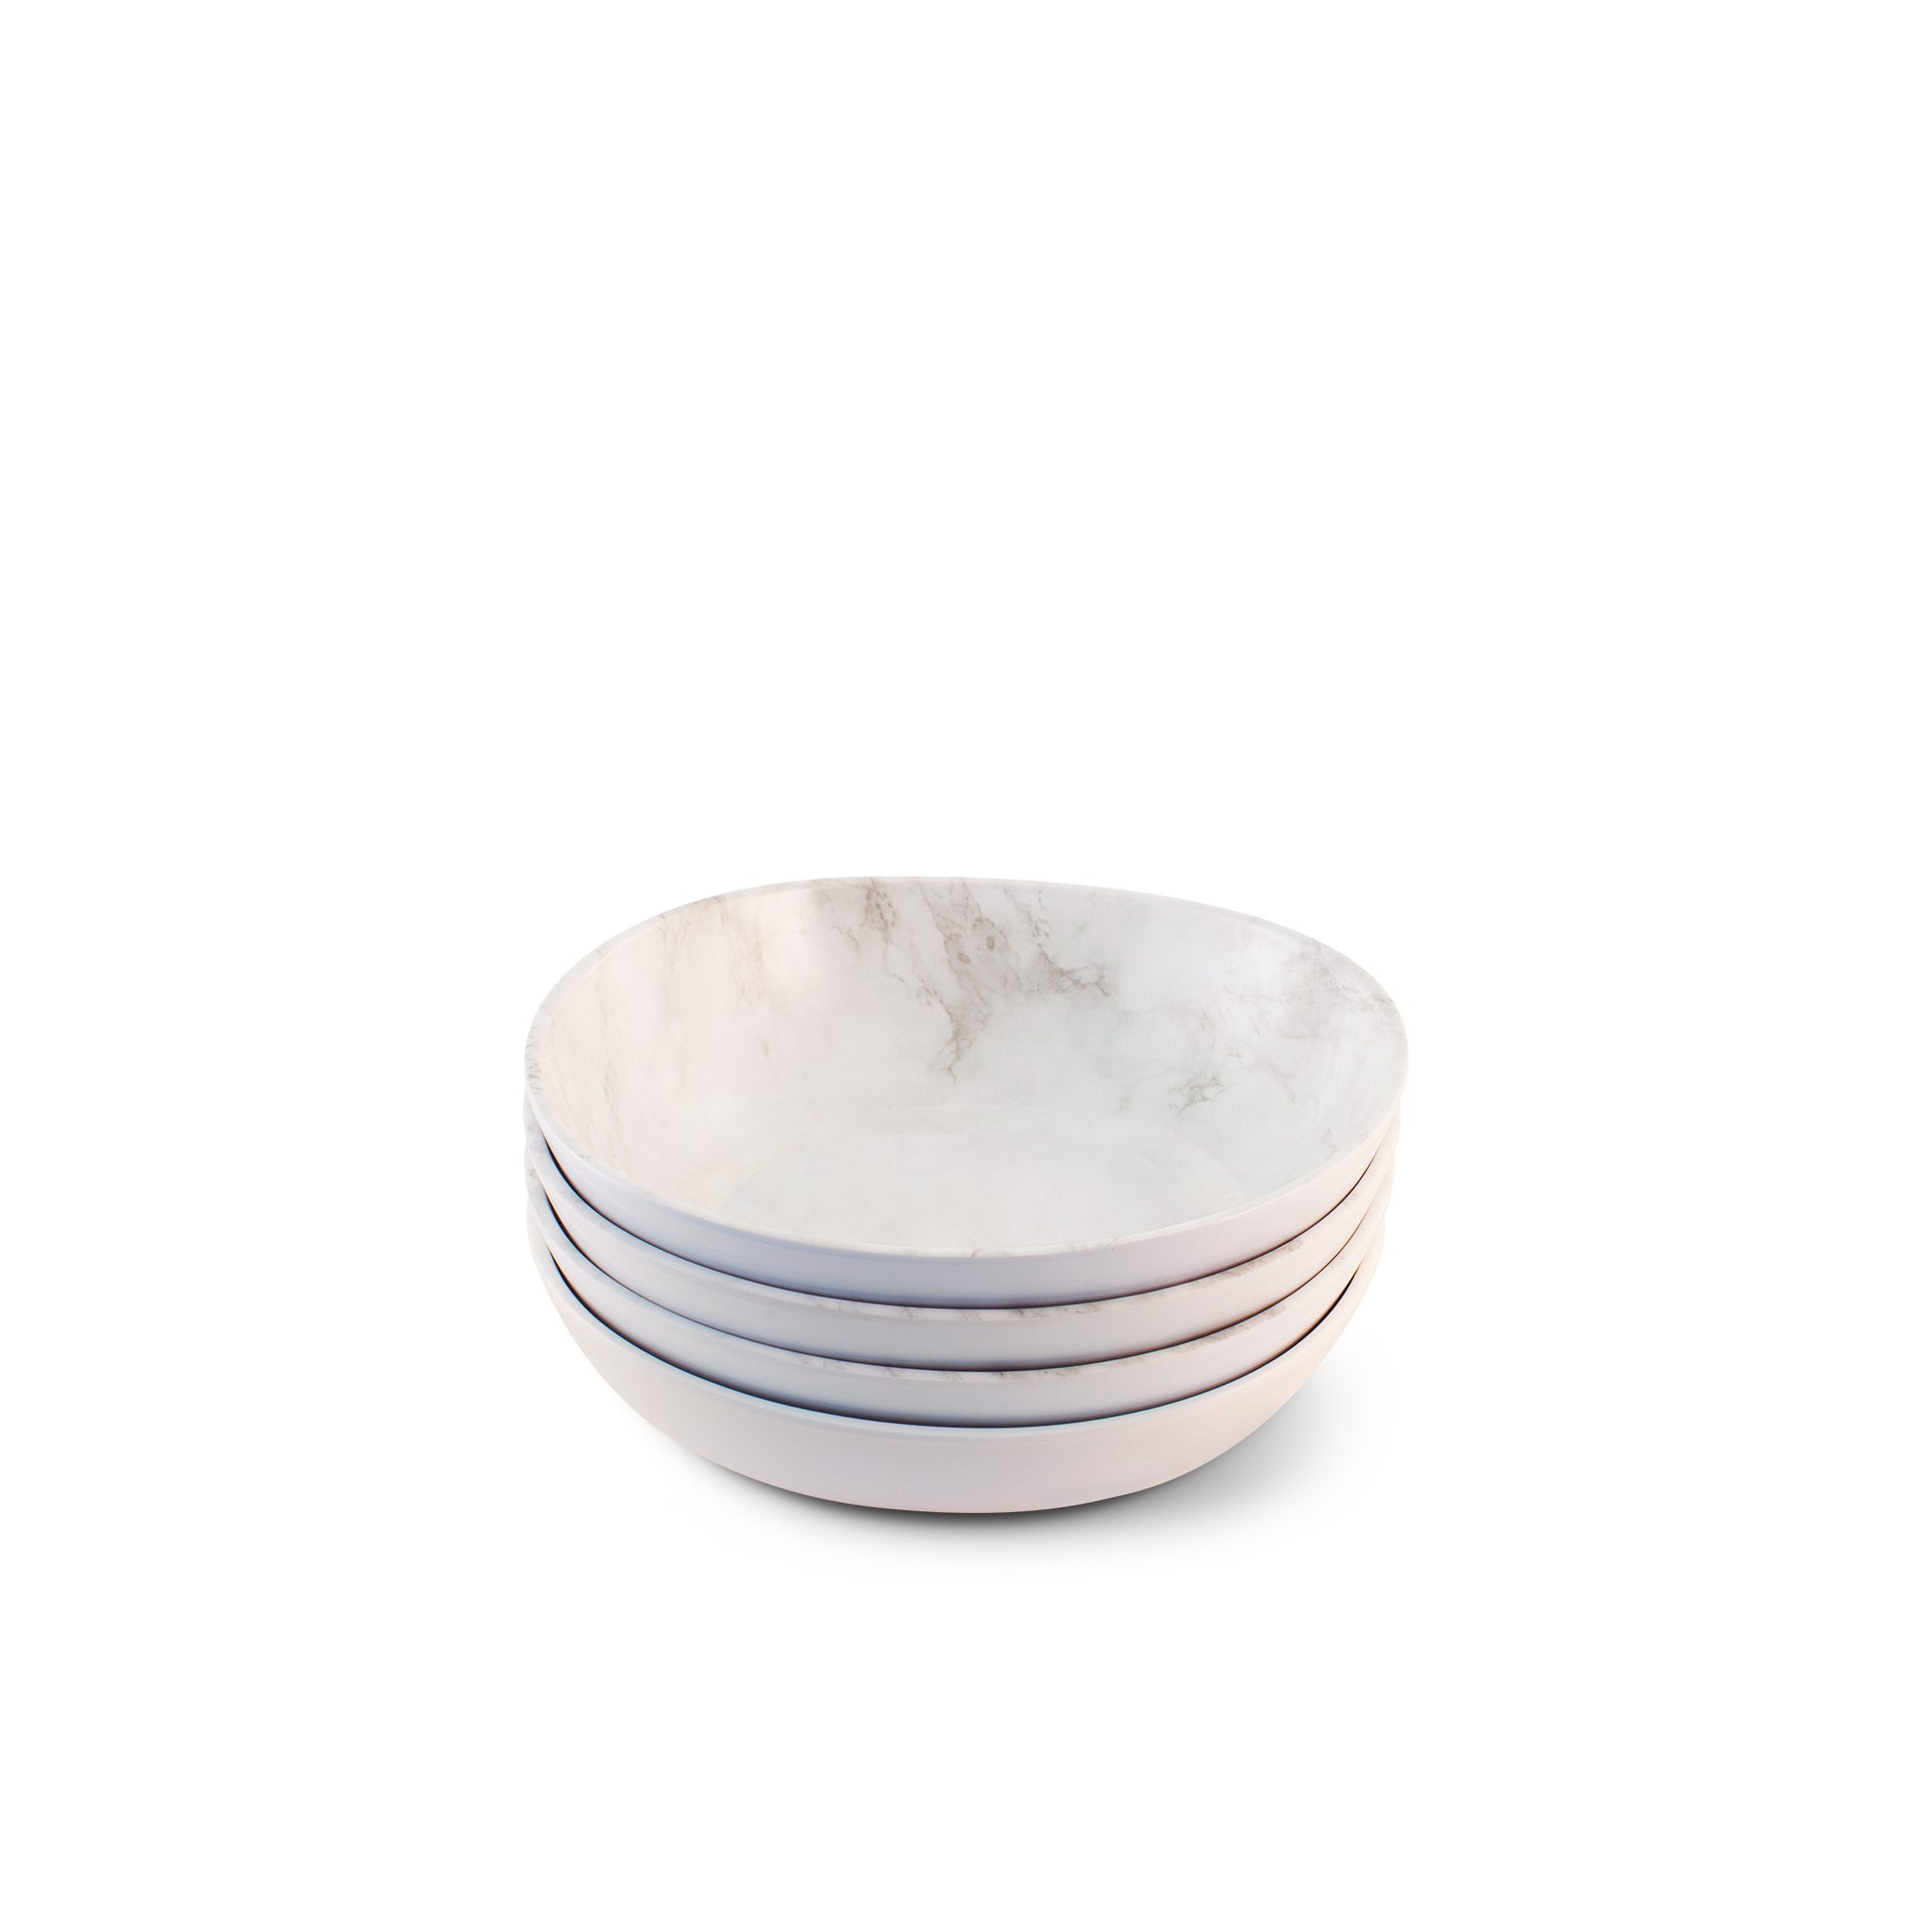 The Plate Story - Opal Round Bowl 6.5" - Shiva White ( Set of 4 )